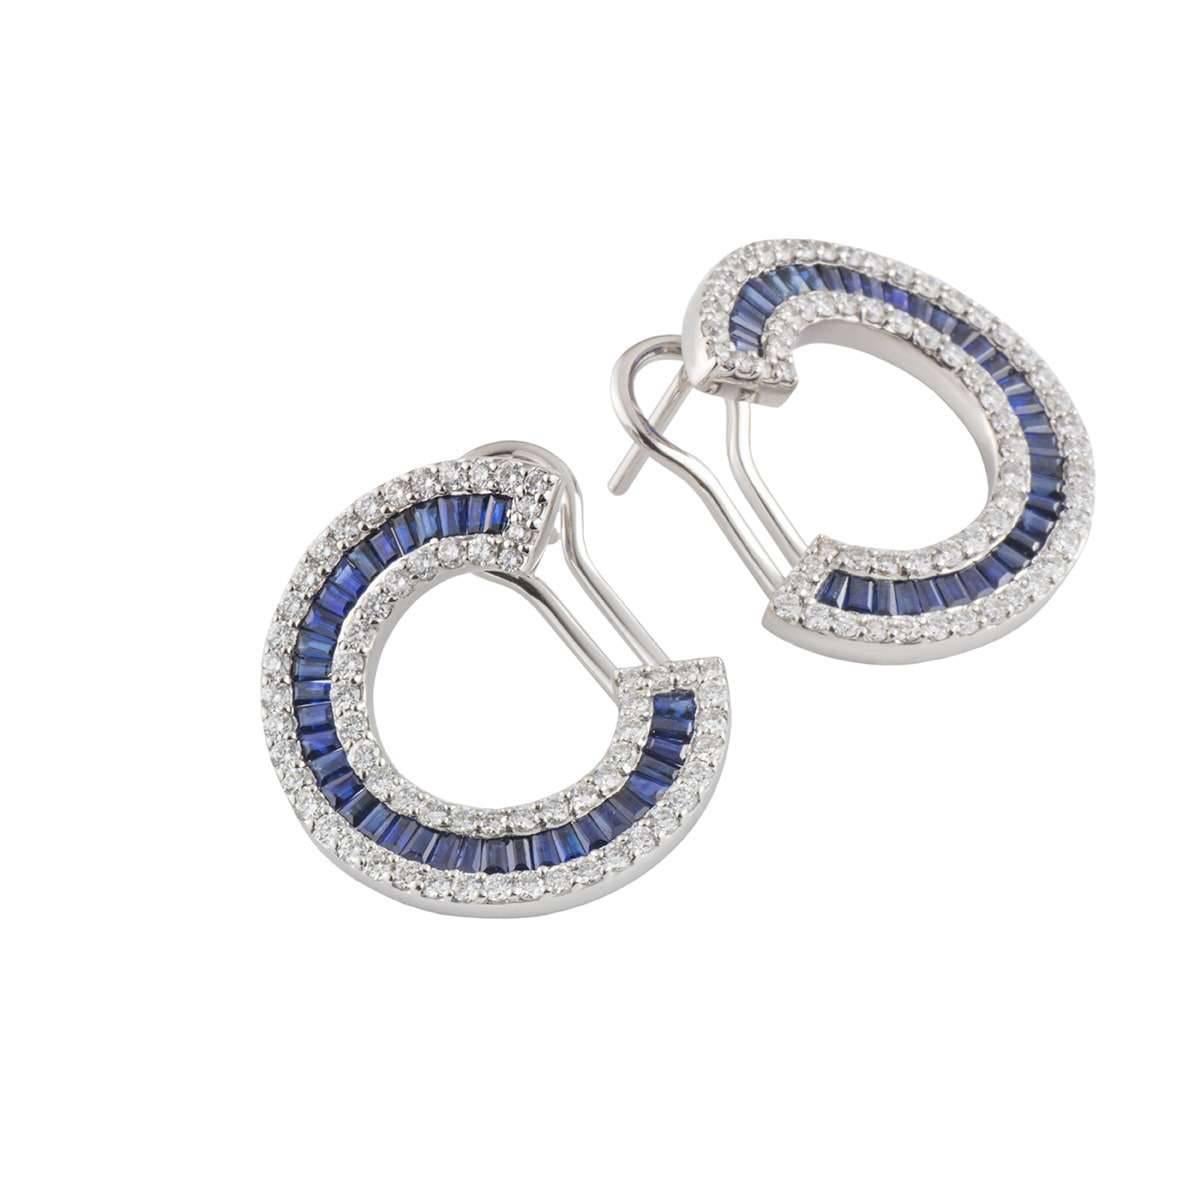 A beautiful pair of 18k white gold diamond and sapphire earrings. The earrings comprises of a spiral motif with baguette cut sapphires set through the centre with a halo of round brilliant cut diamonds. The diamonds have a weight of 1.40ct, G-H